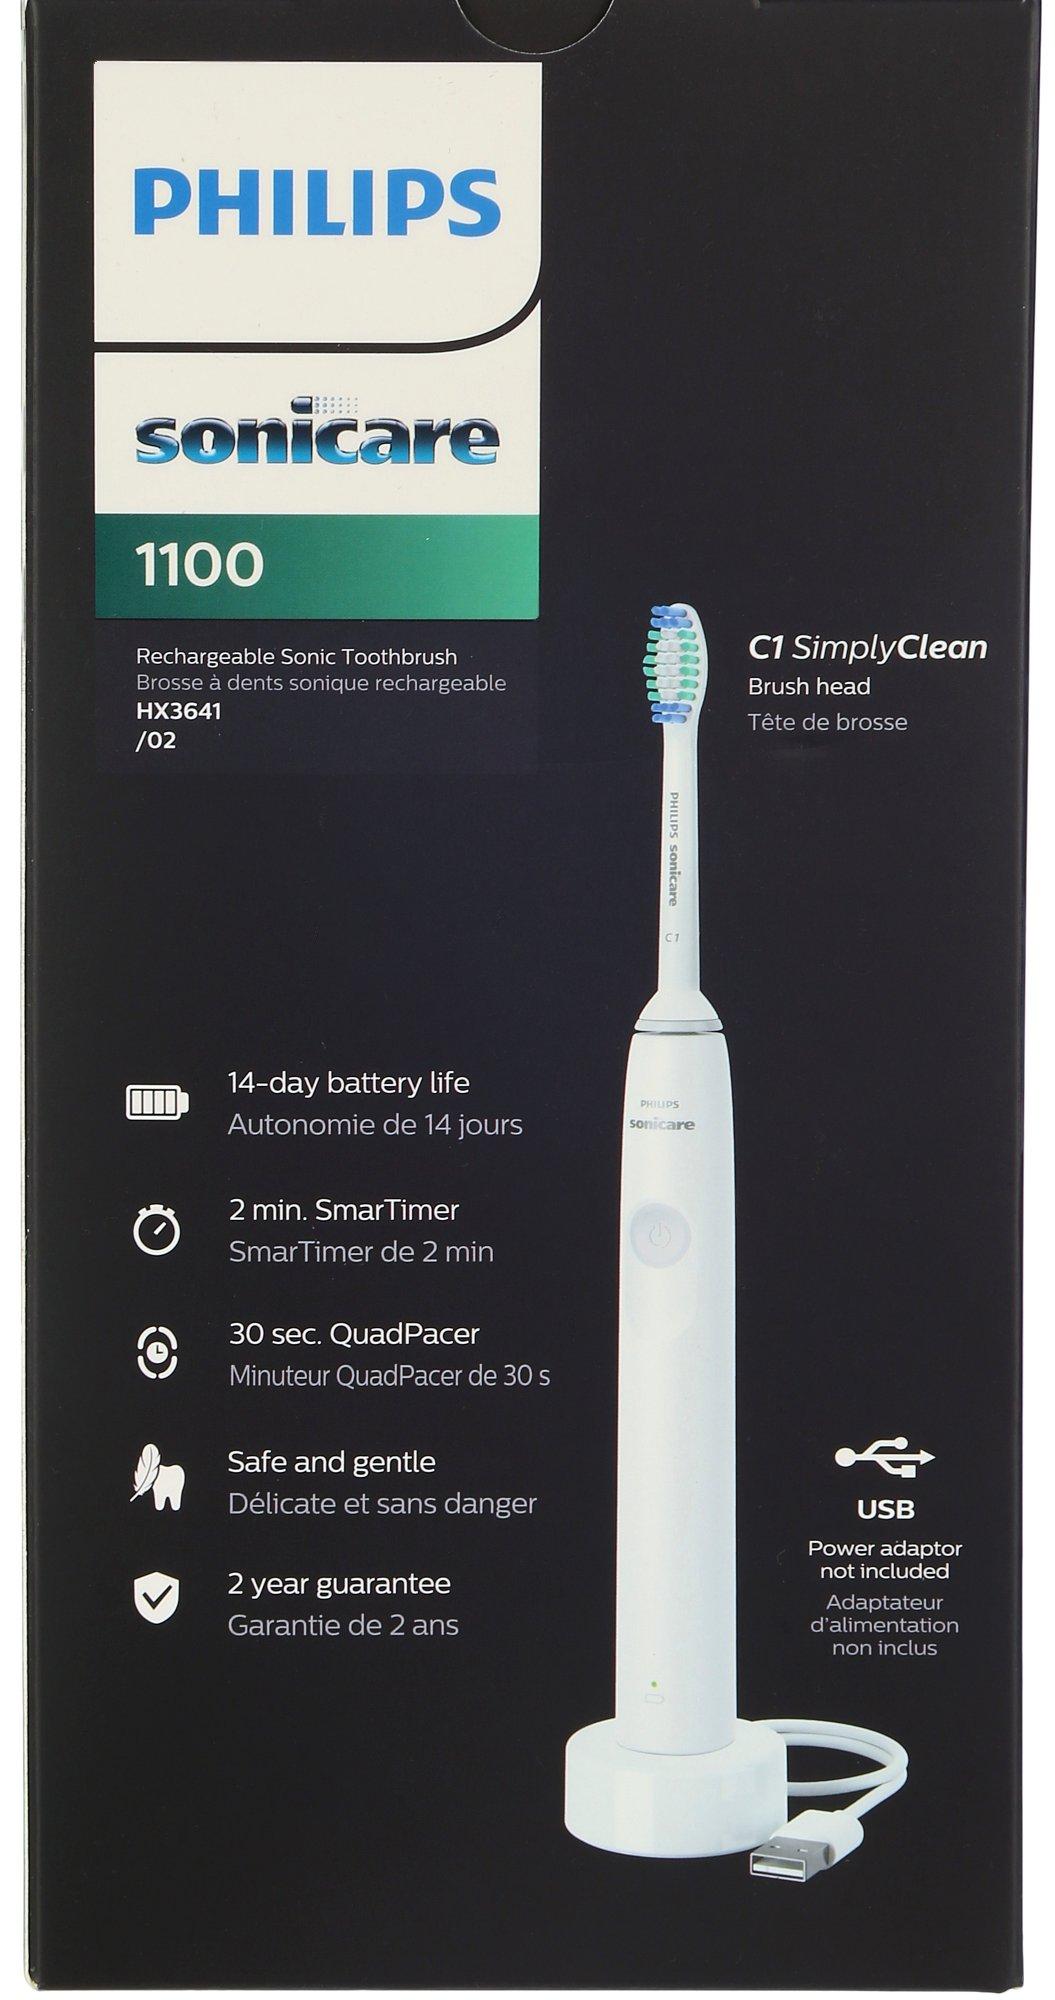 Philips Sonicare 1100 Rechargeable Power Toothbrush